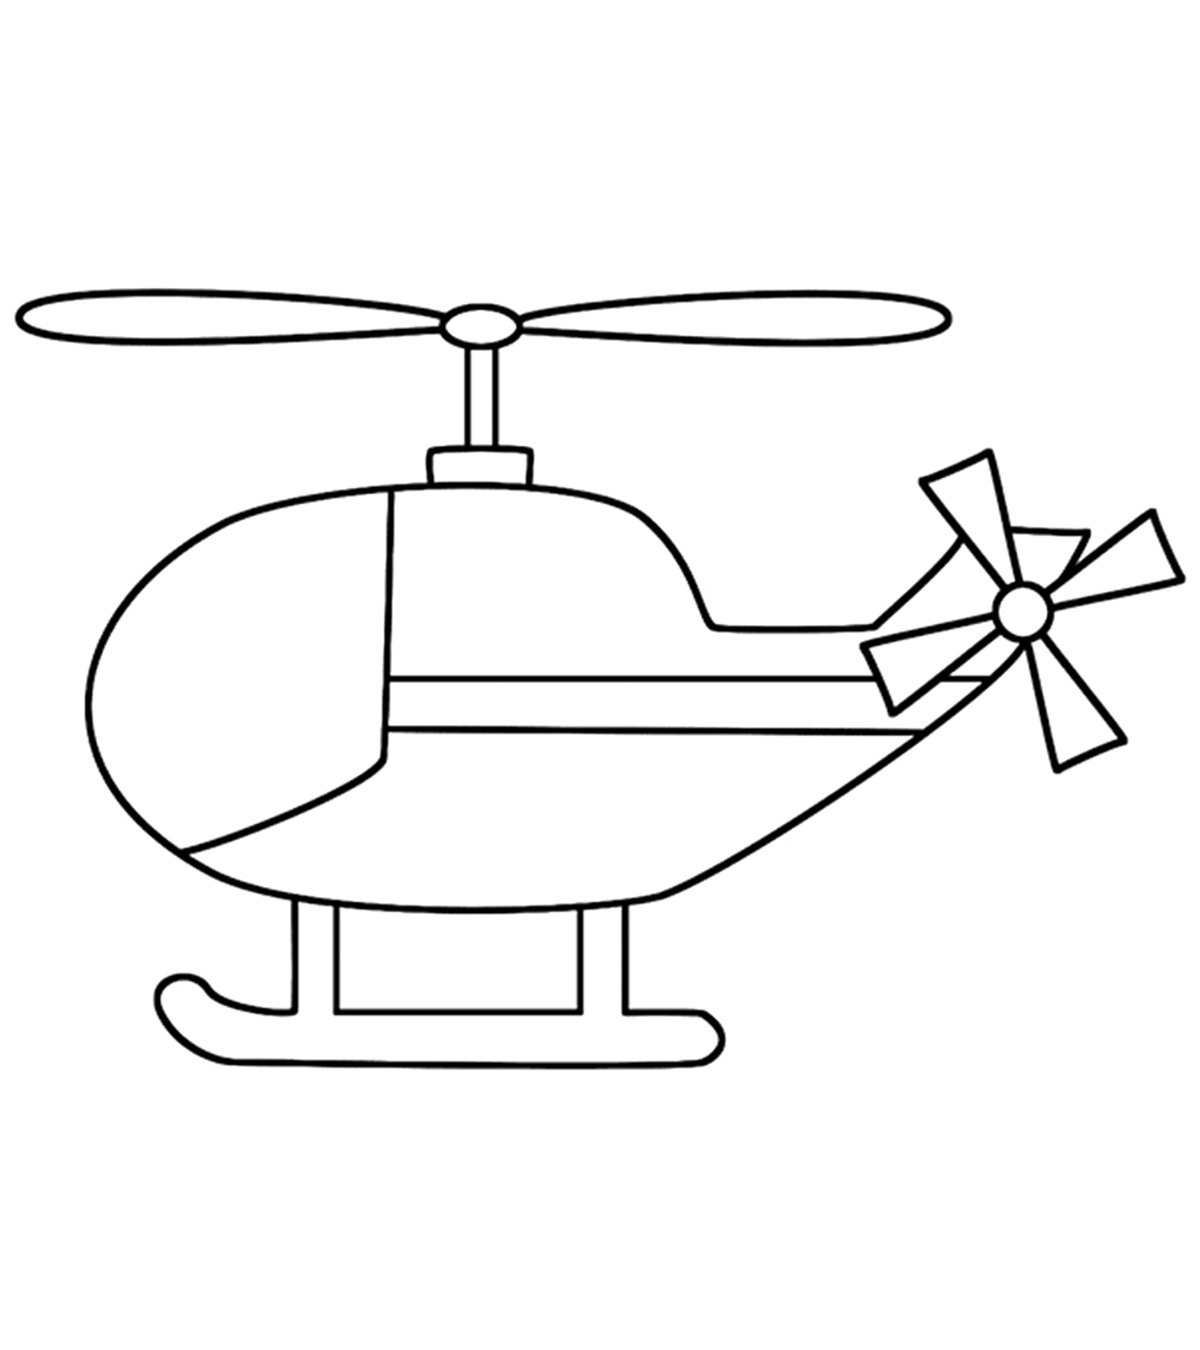 Top 10 Helicopter Coloring Pages For Your Little Ones